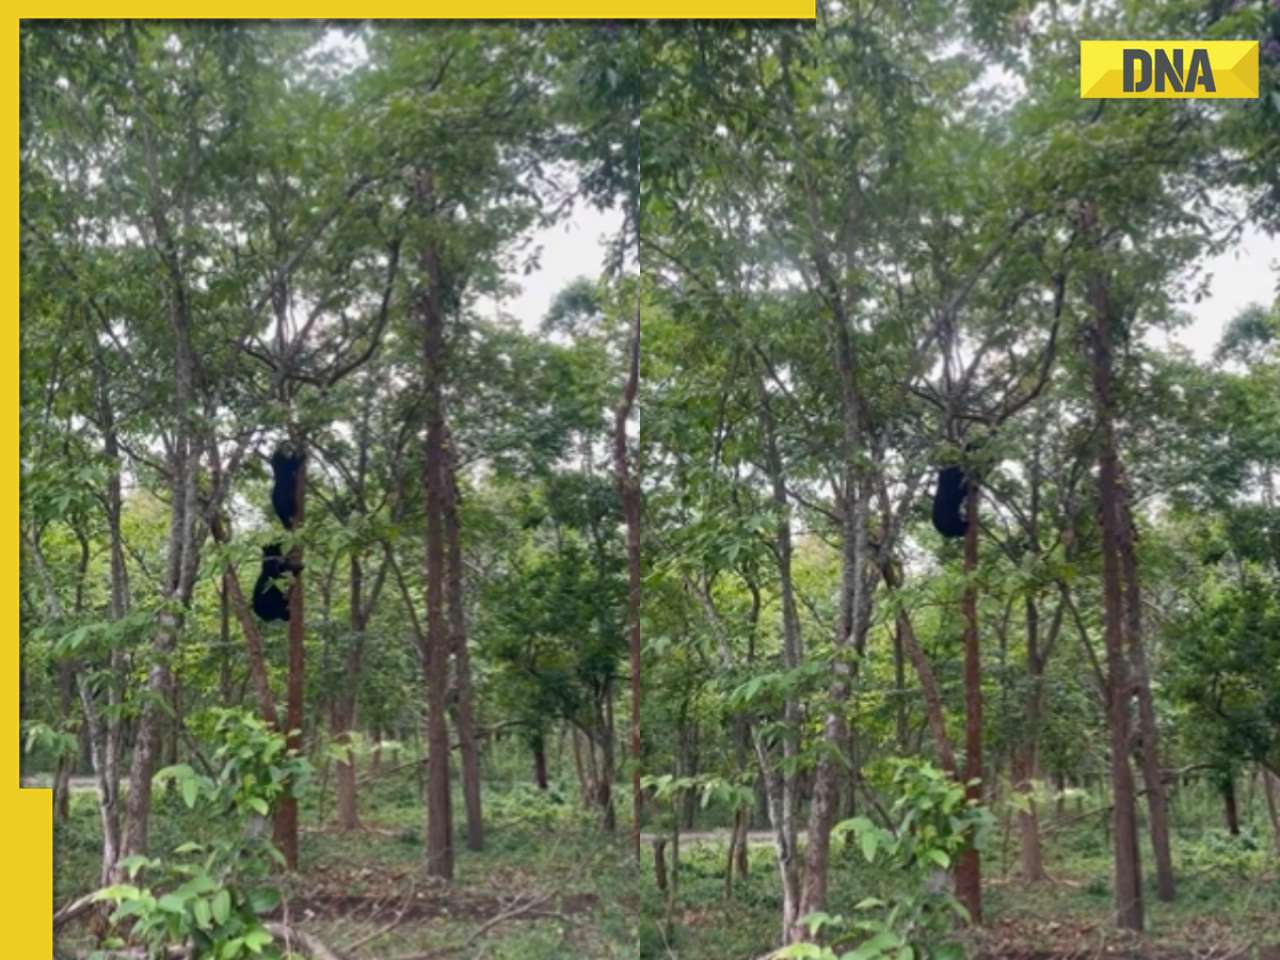 Ever seen bear climbing tree? If not, viral video will leave you stunned